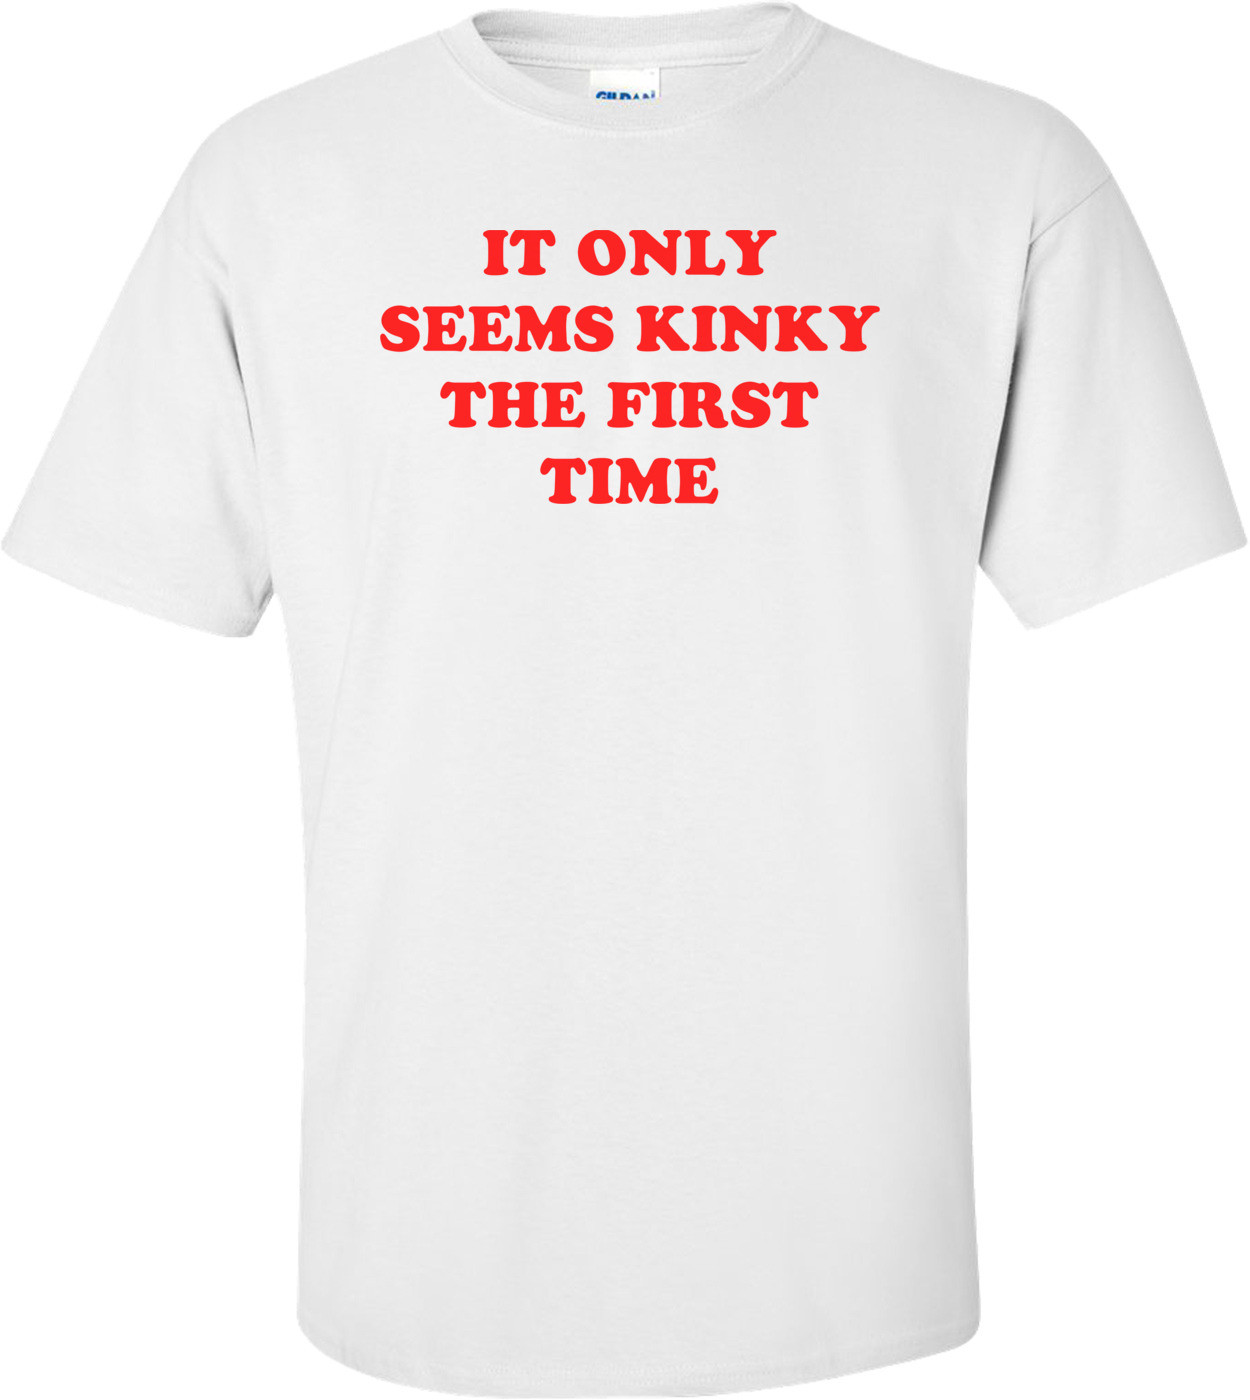 IT ONLY SEEMS KINKY THE FIRST TIME Shirt